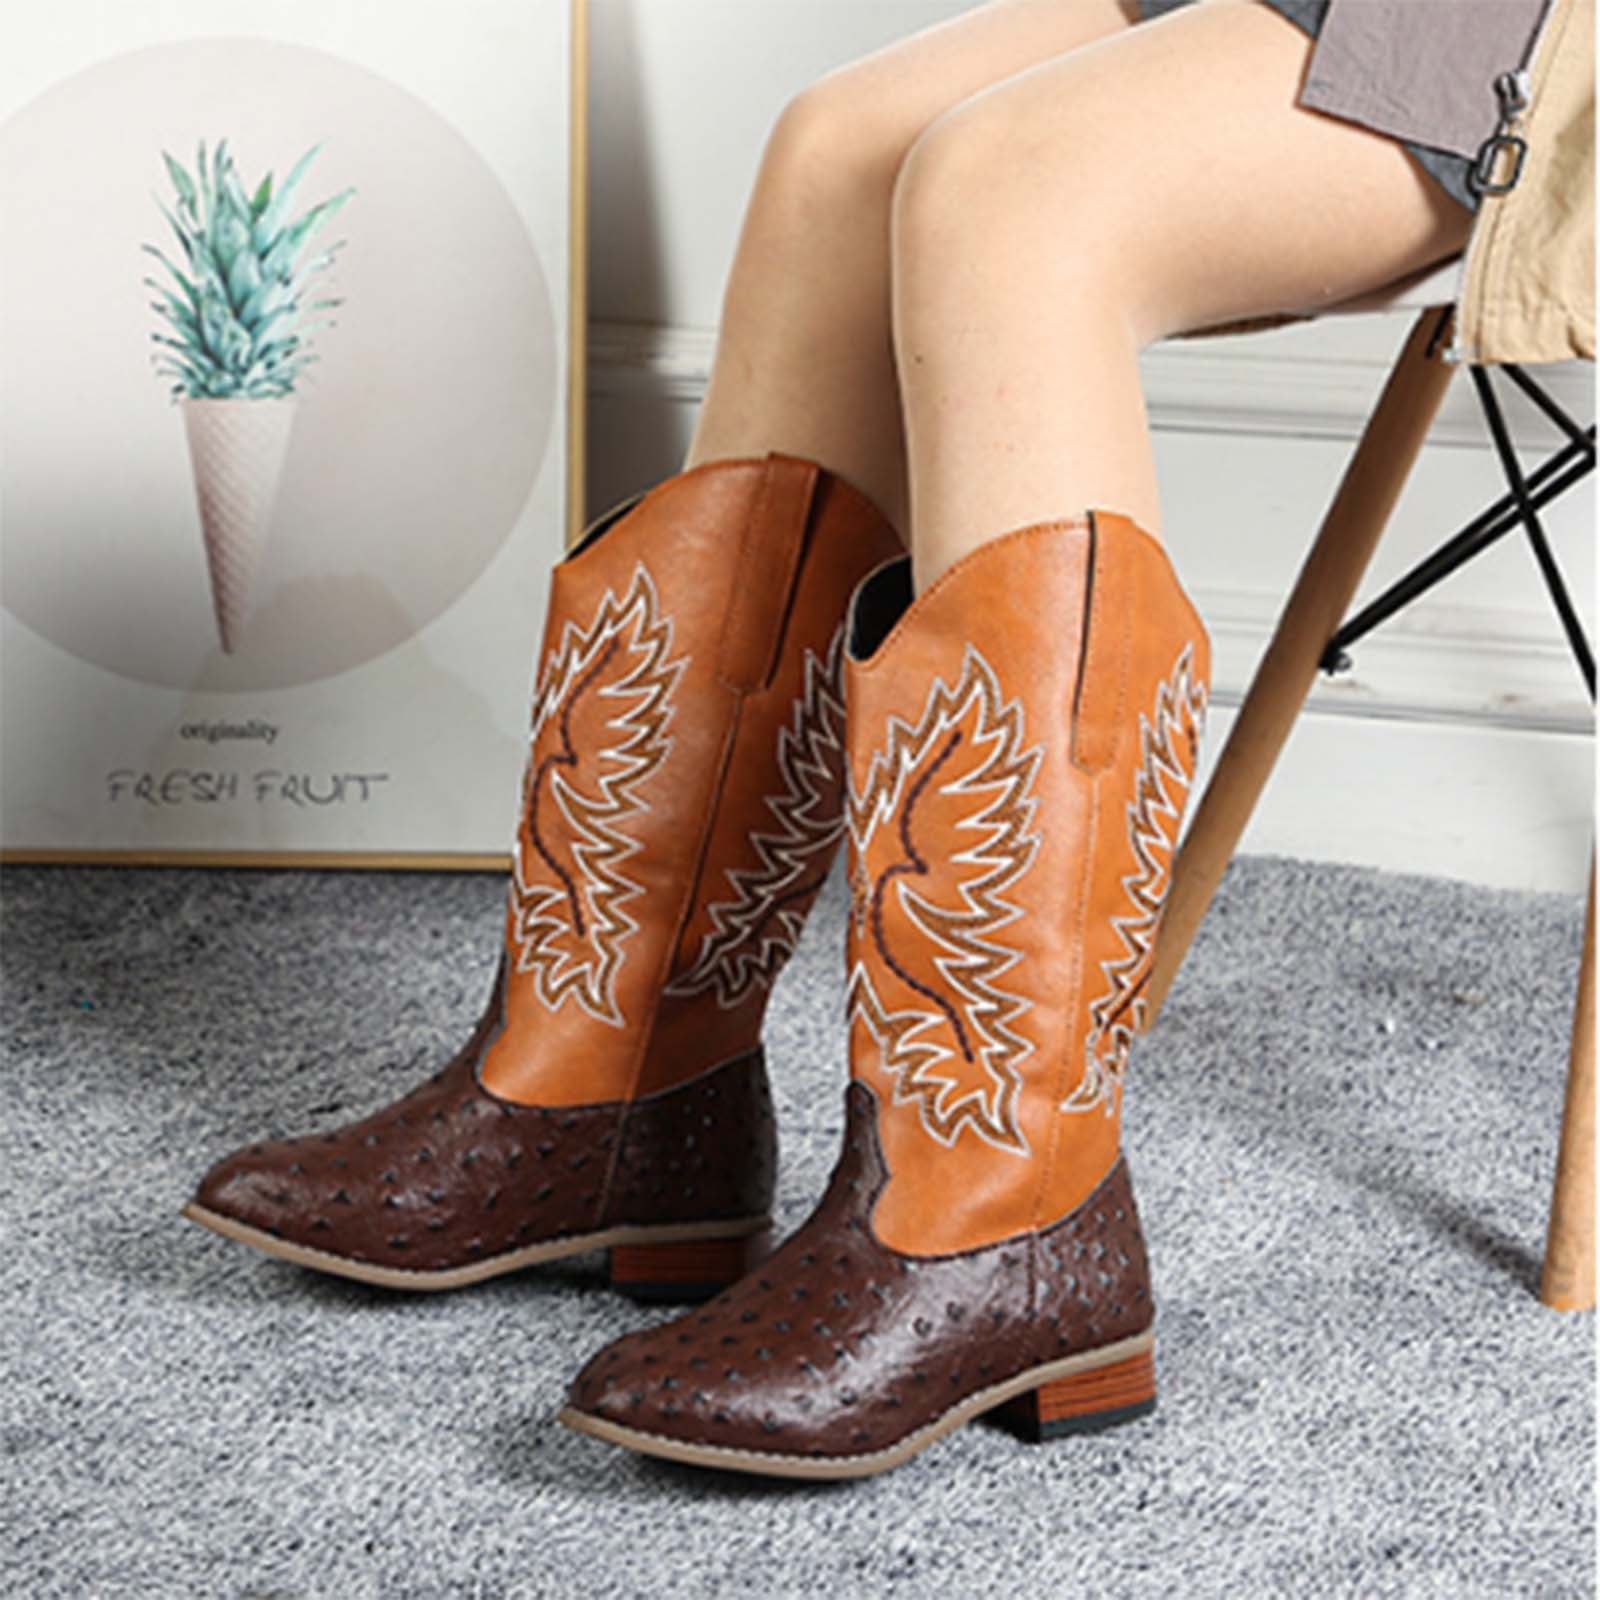 Details about   Women's Cowgirl Round Toe Low Heel Ankle Mid-Calf Boots Shoes  Size 5.5-10 New